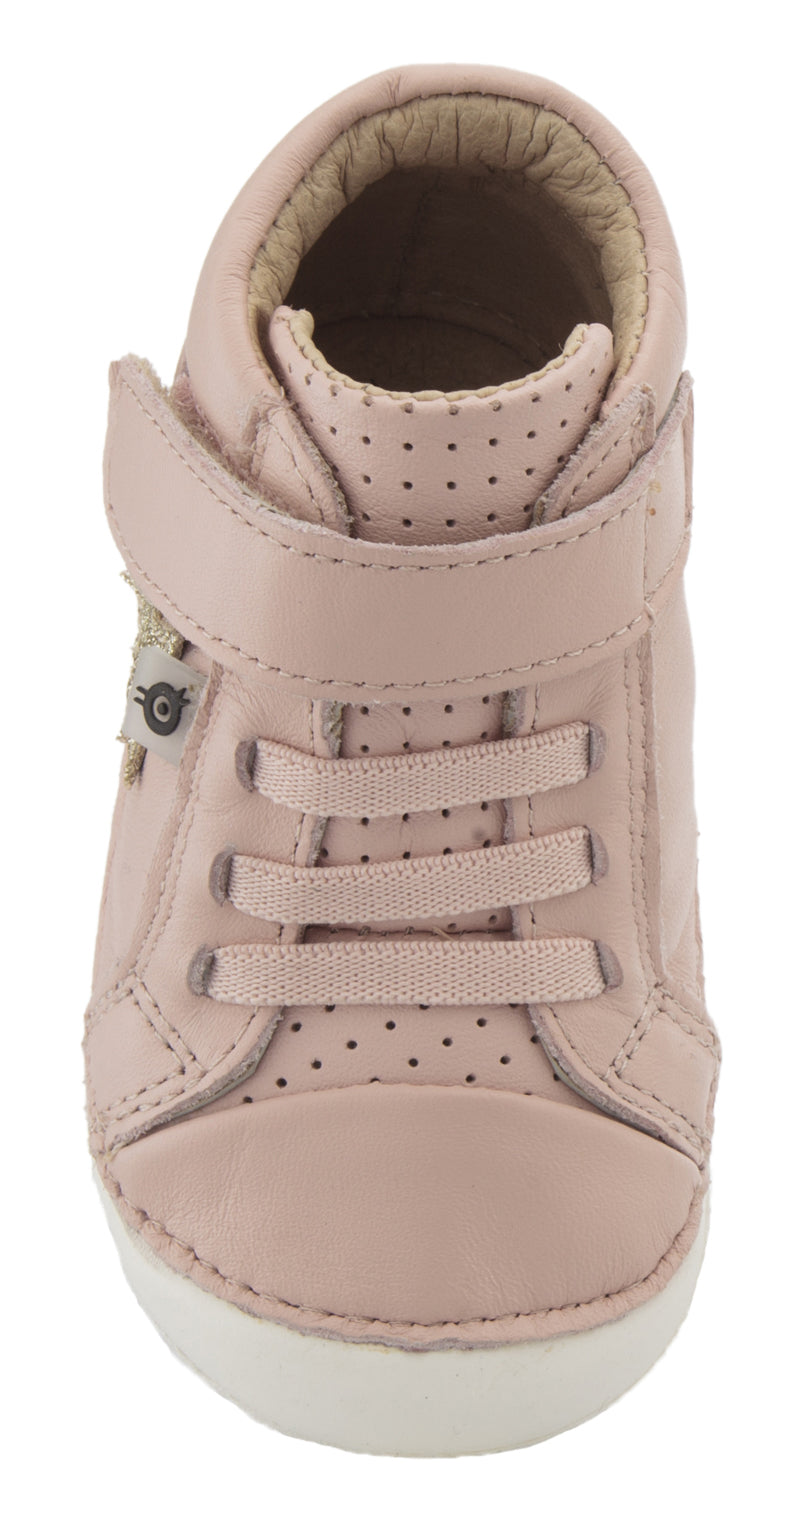 Old Soles Girl's Champster Pave Shoes - Powder Pink/Gold/Glam Gold